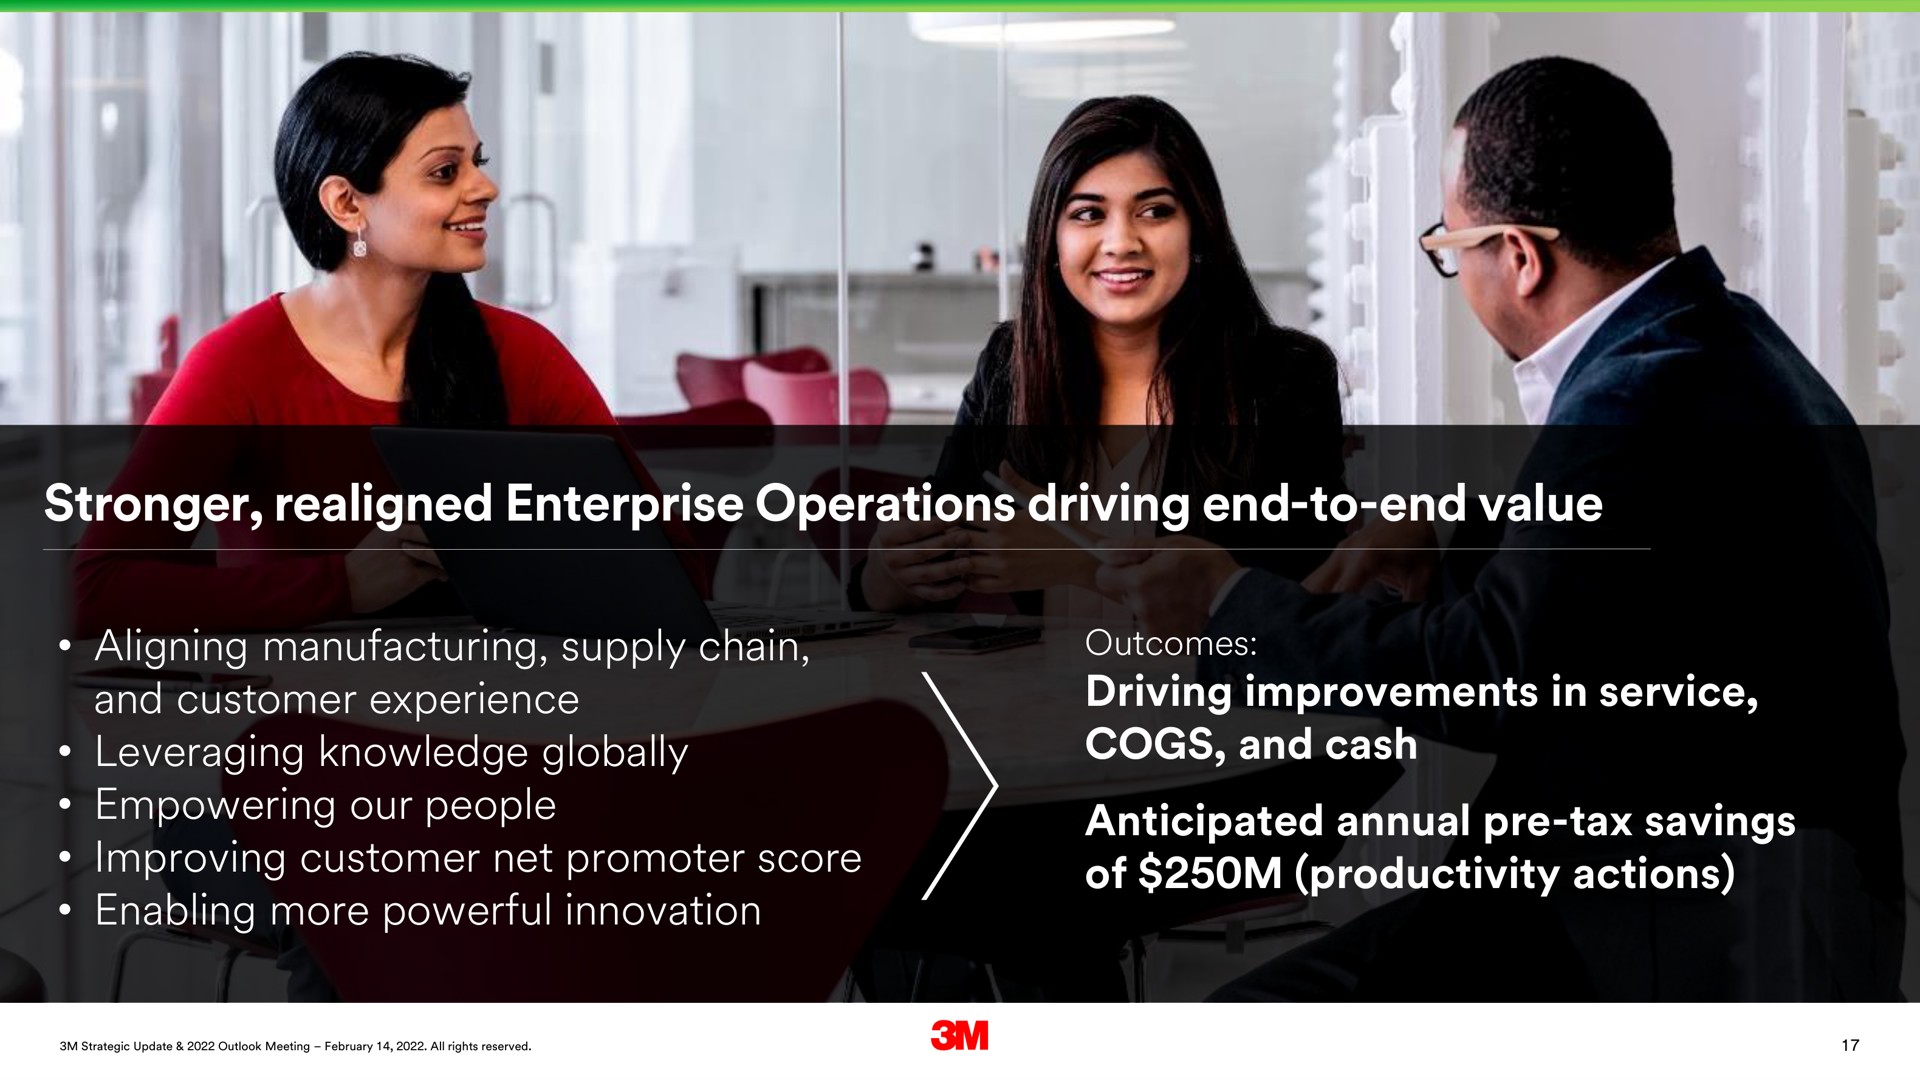 realigned enterprise operations driving end to end value aligning manufacturing supply chain and customer experience leveraging knowledge globally empowering our people improving customer net promoter score enabling more powerful innovation driving improvements in service cogs and cash anticipated annual tax savings of productivity actions | 3M